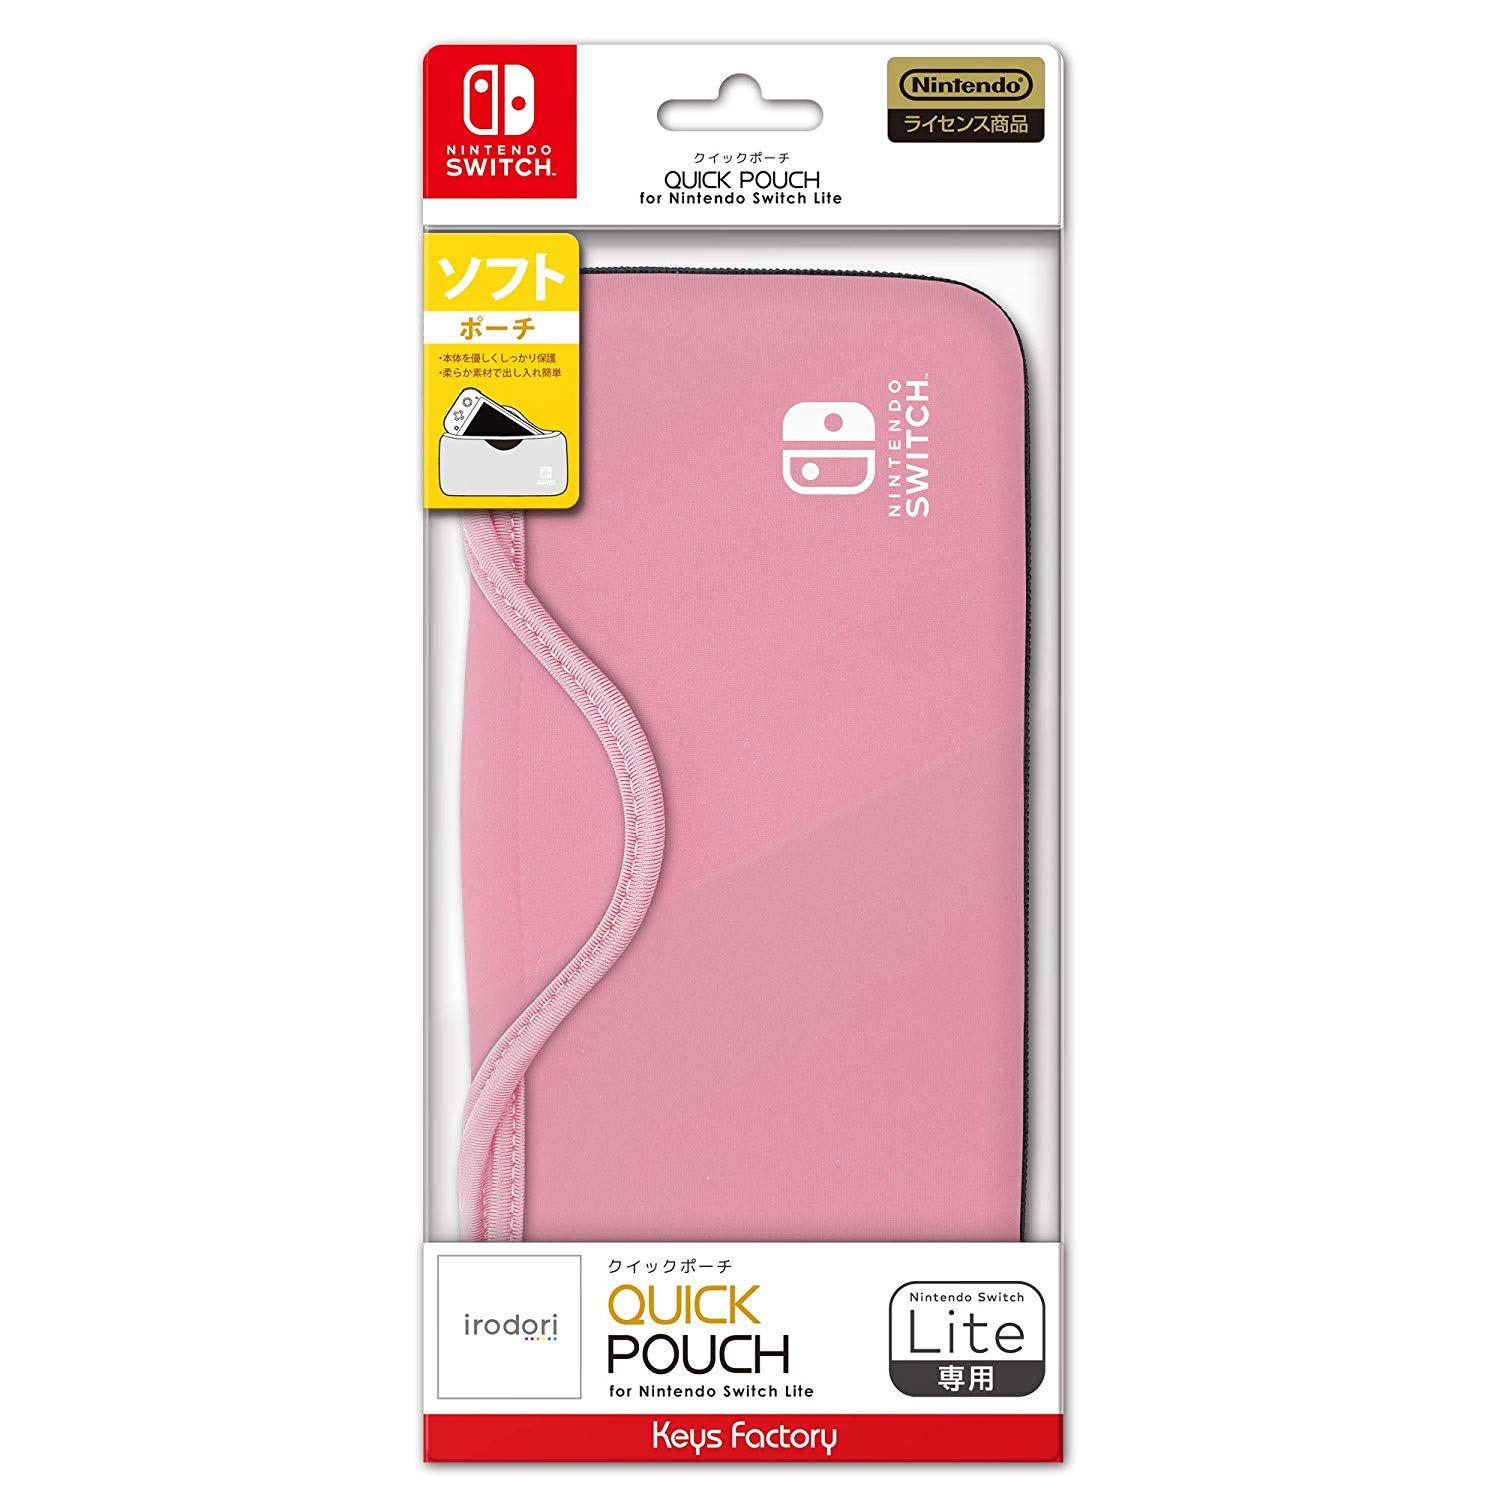 nintendo switch in pink